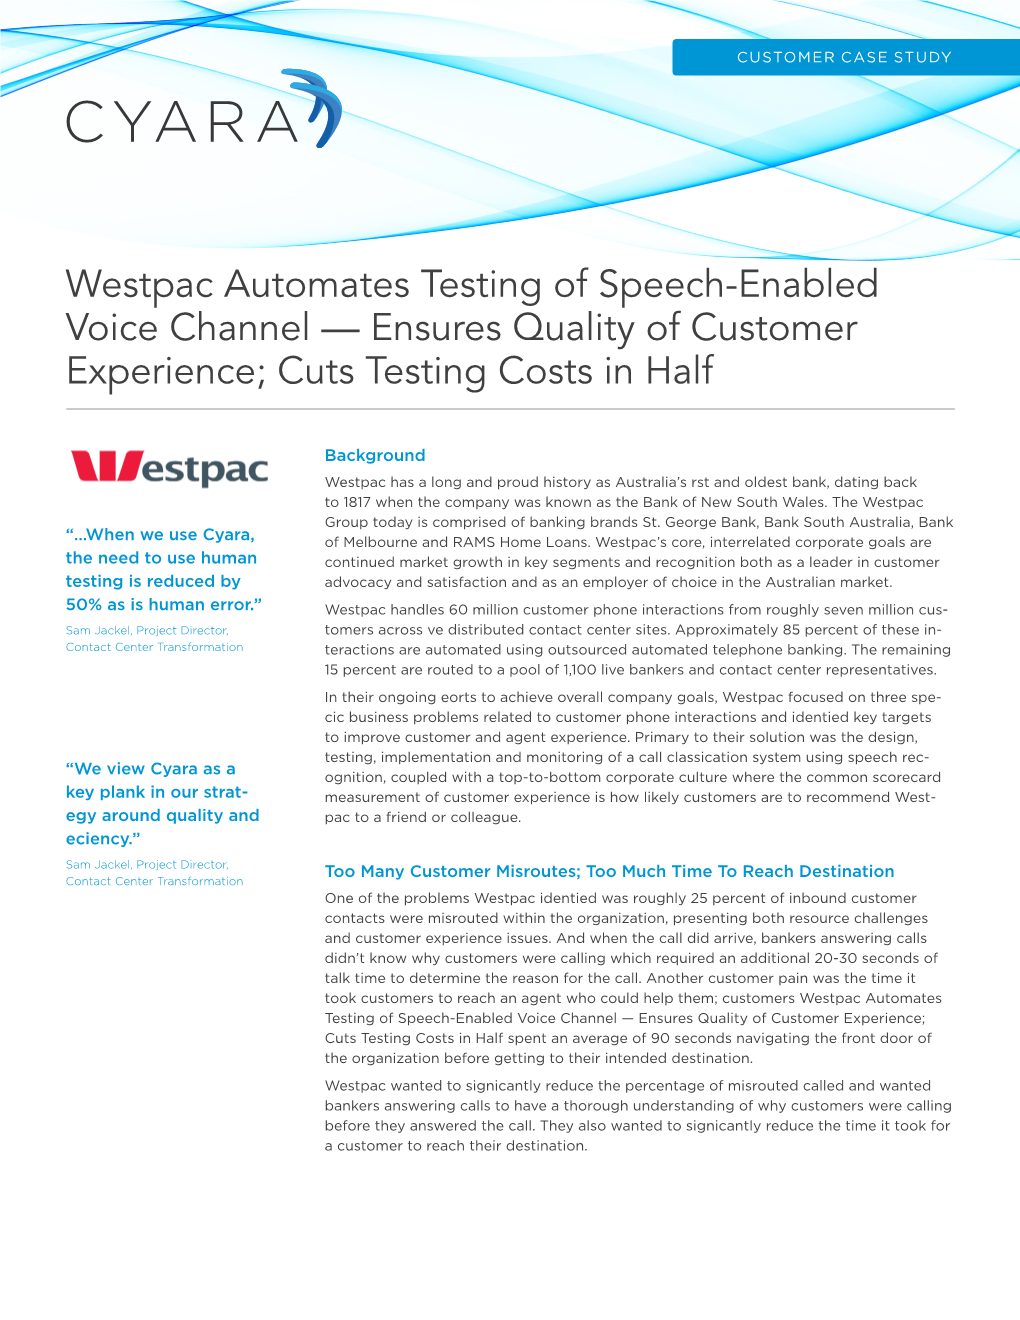 Westpac Automates Testing of Speech-Enabled Voice Channel — Ensures Quality of Customer Experience; Cuts Testing Costs in Half